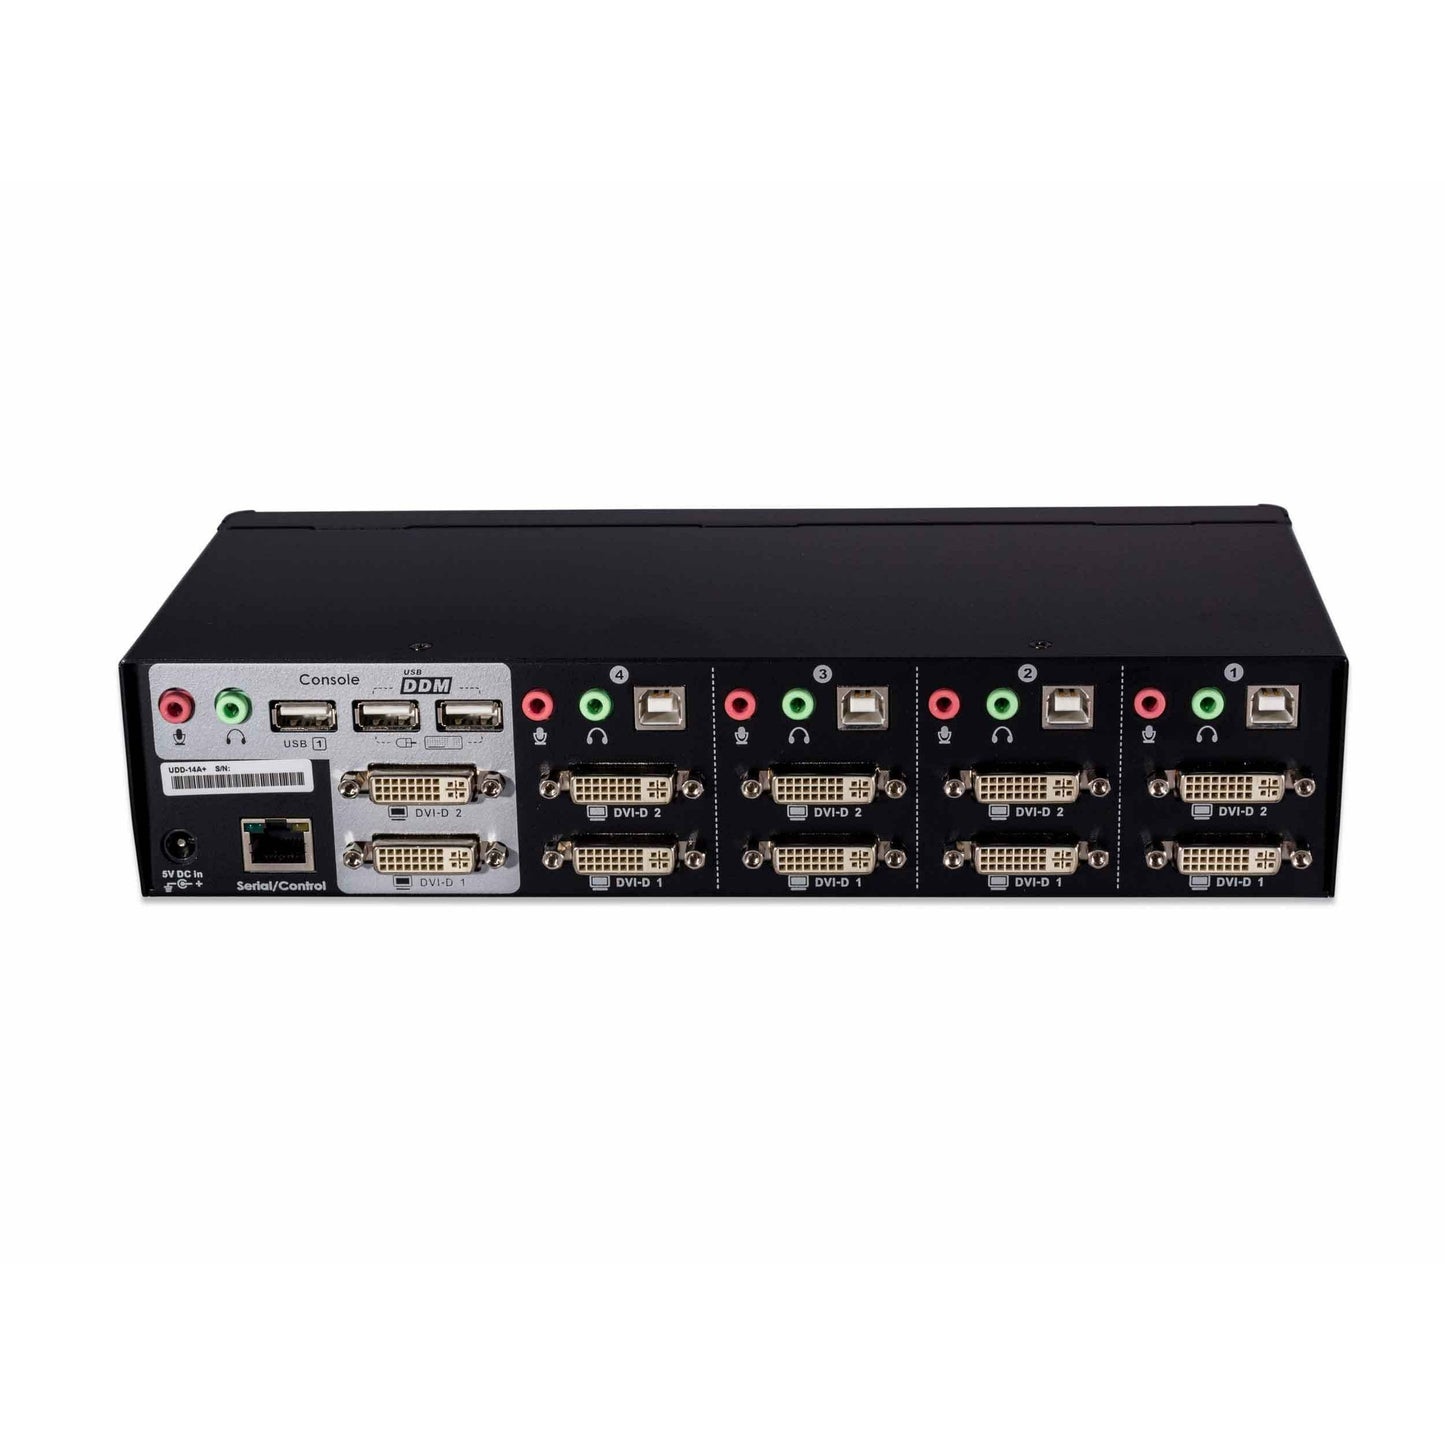 UDD-14A+ DVI-D KVM switch for Two Monitors and Four Computers